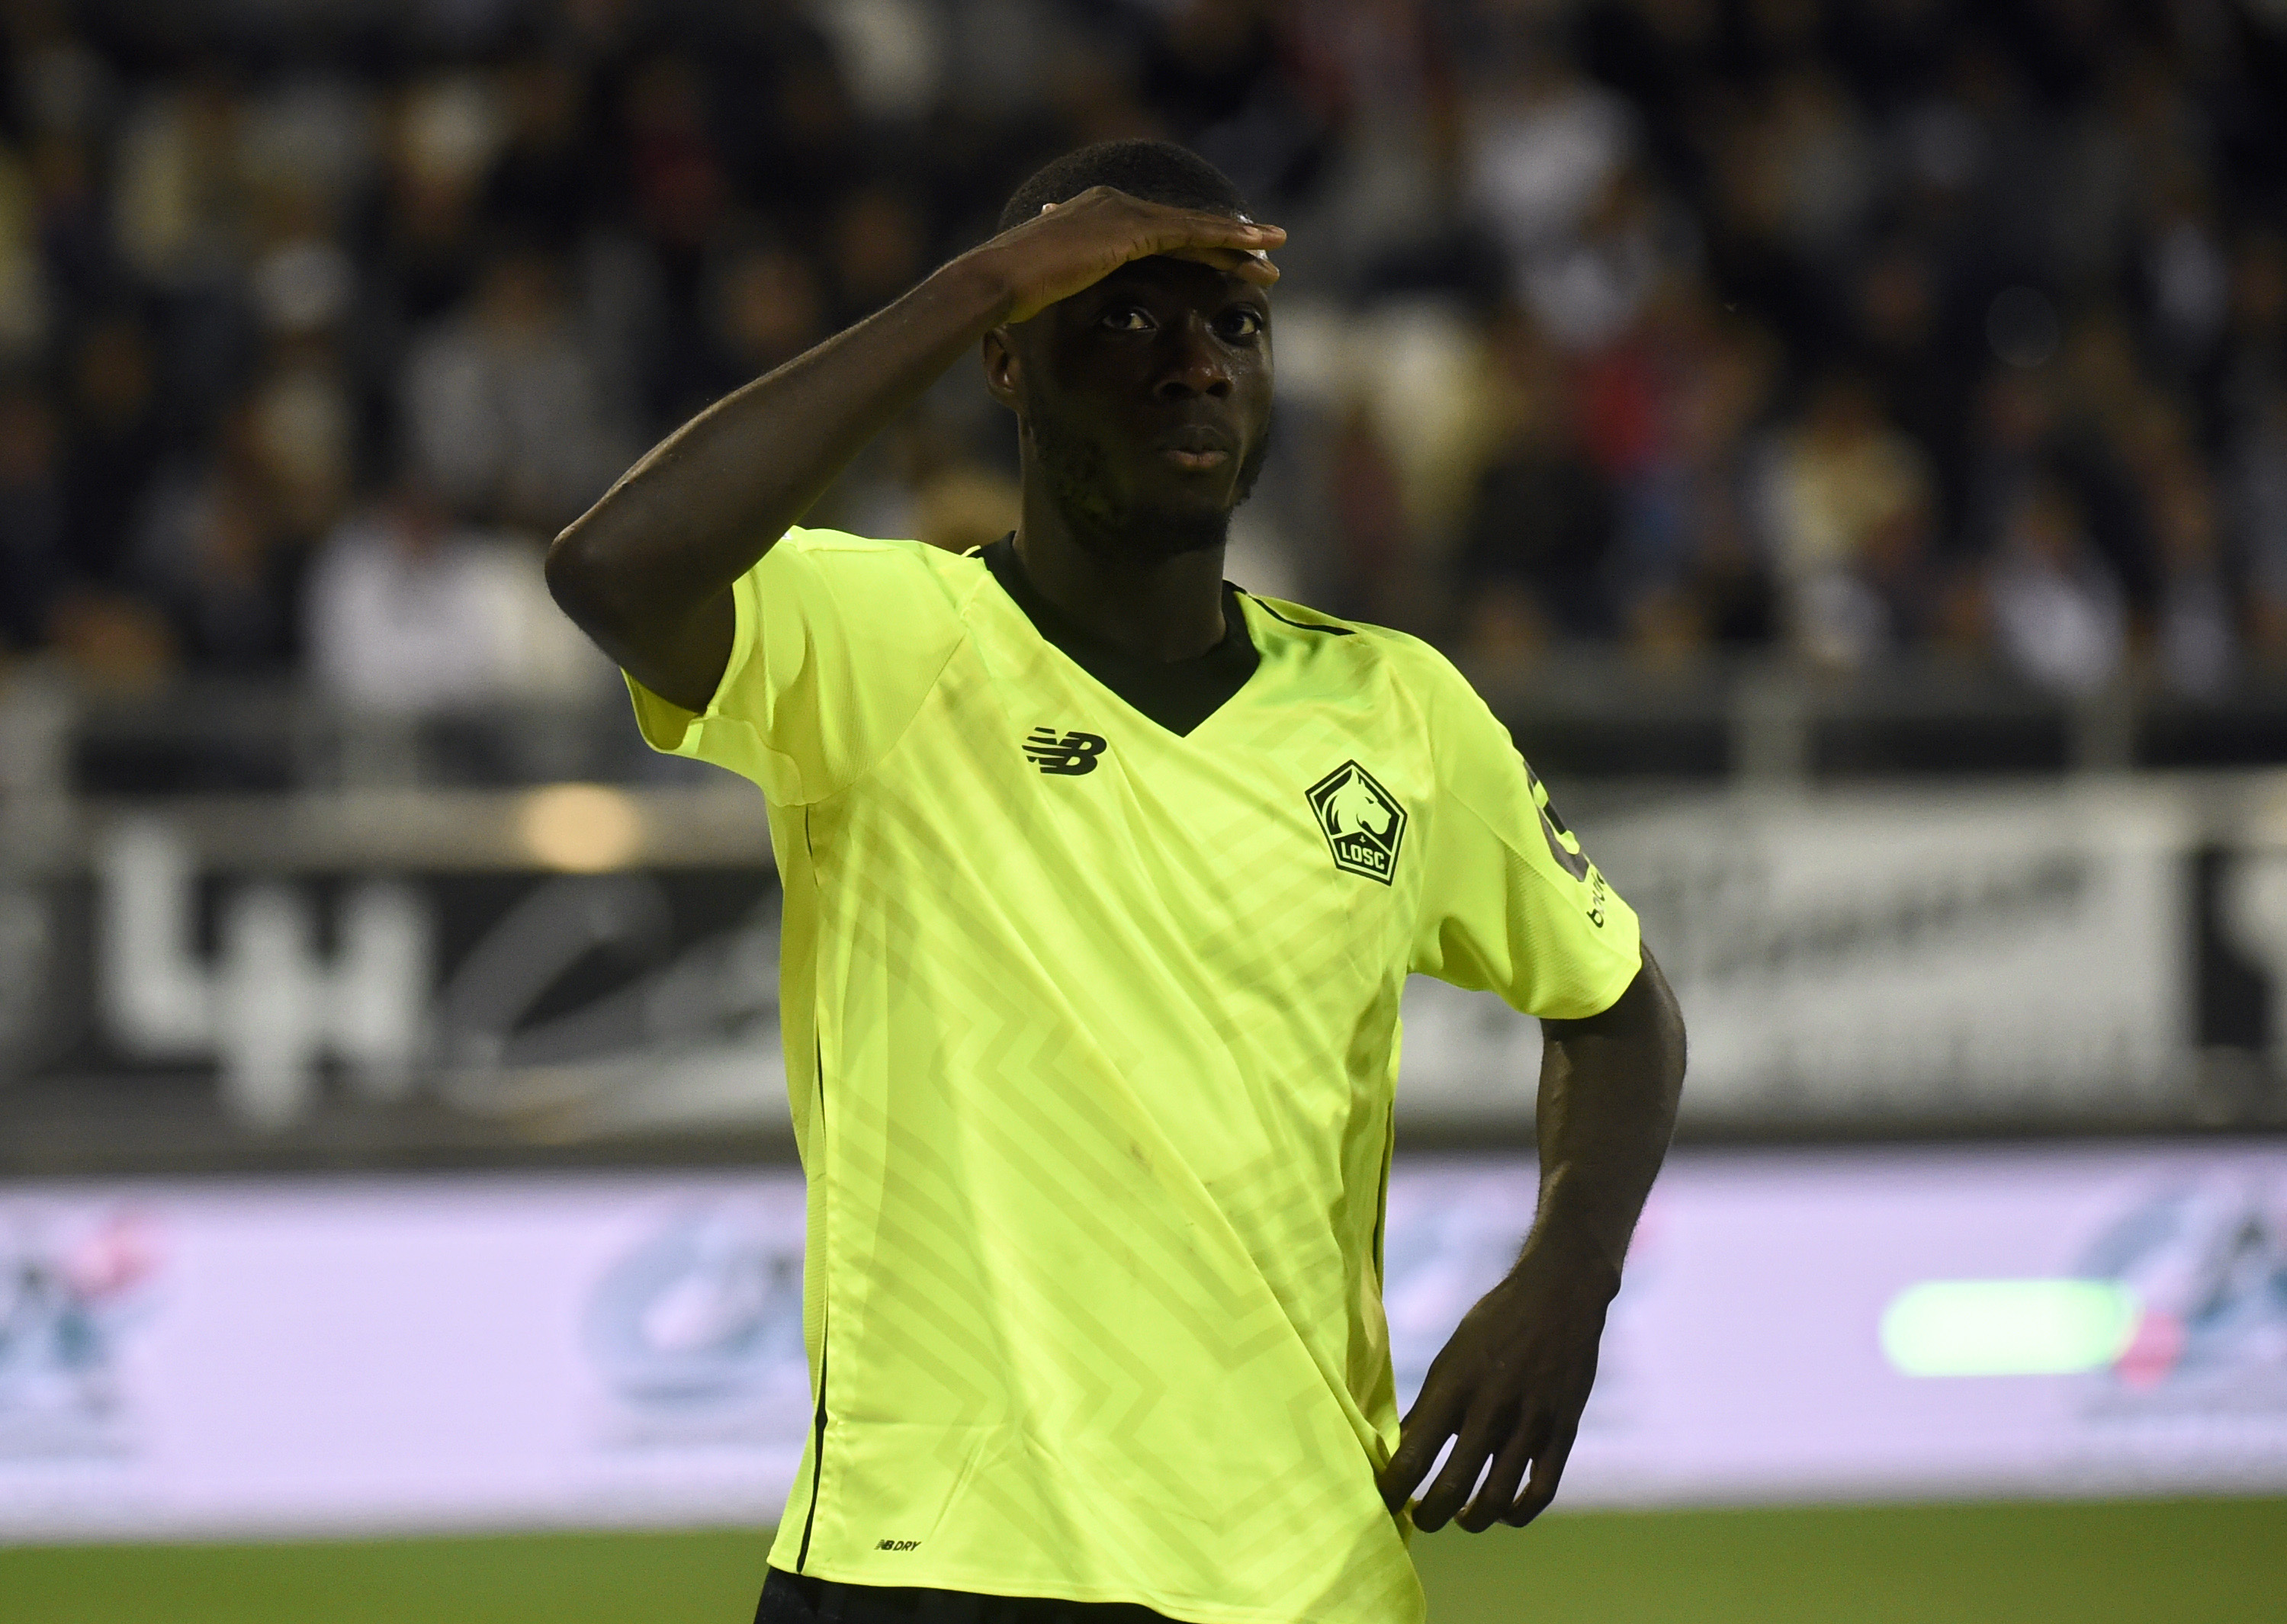 Lille's Ivorian forward Nicolas Pepe celebrates after scoring a goal during the French L1 football match between Amiens and Lille at the Licorne stadium in Amiens, northern France, on August 26, 2018. (Photo by FRANCOIS LO PRESTI / AFP)        (Photo credit should read FRANCOIS LO PRESTI/AFP/Getty Images)